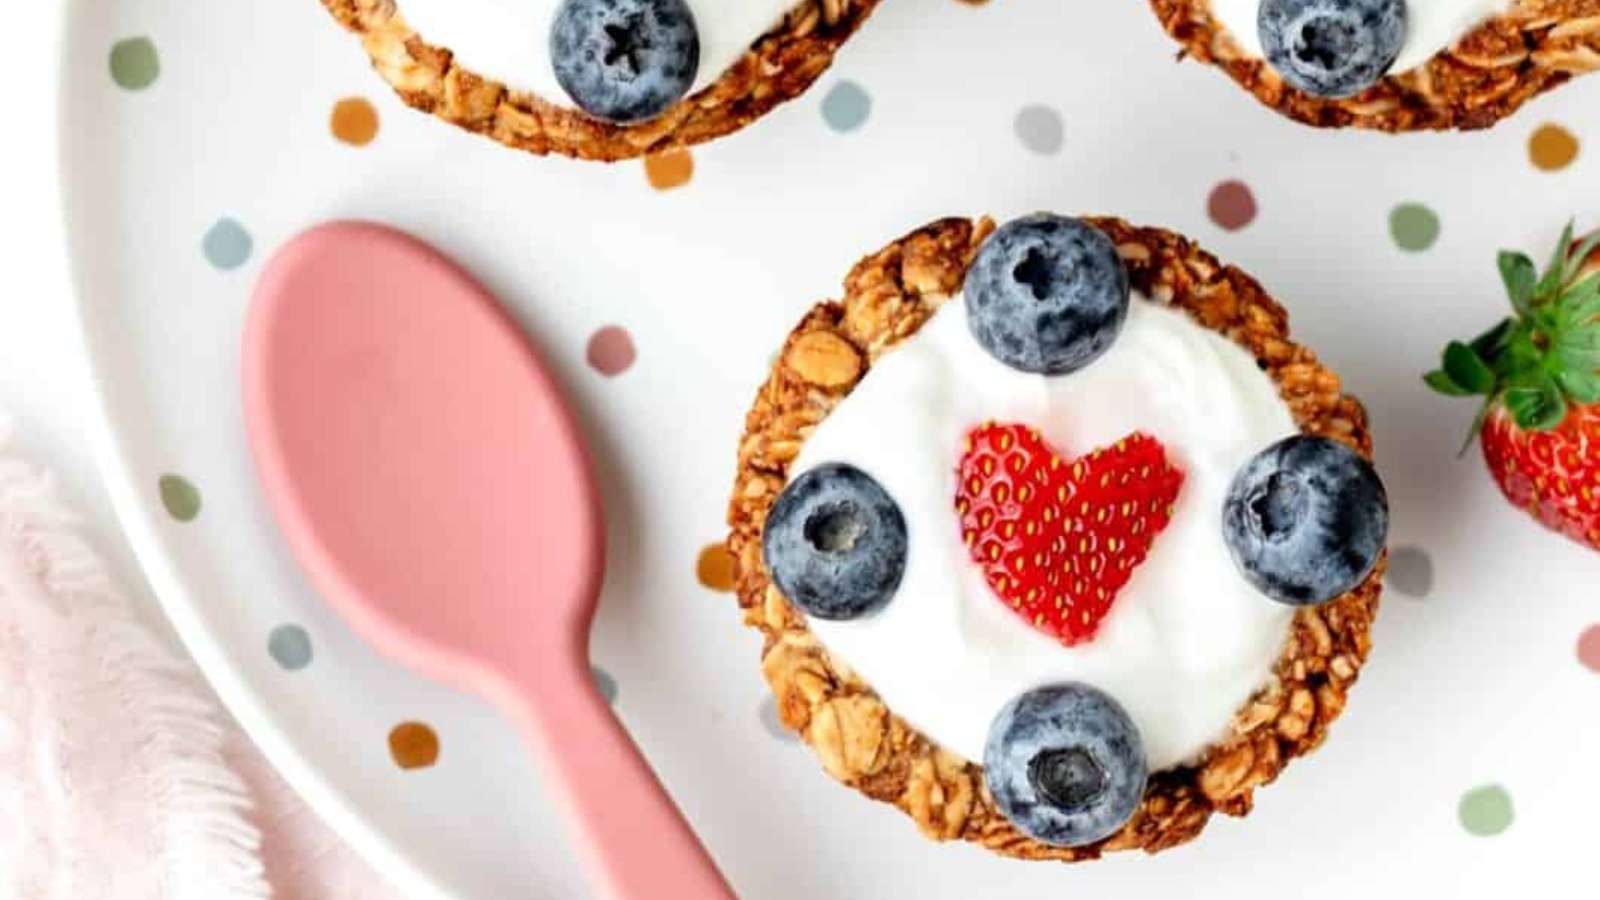 A heart shaped granola muffin with blueberries and strawberries on a plate.